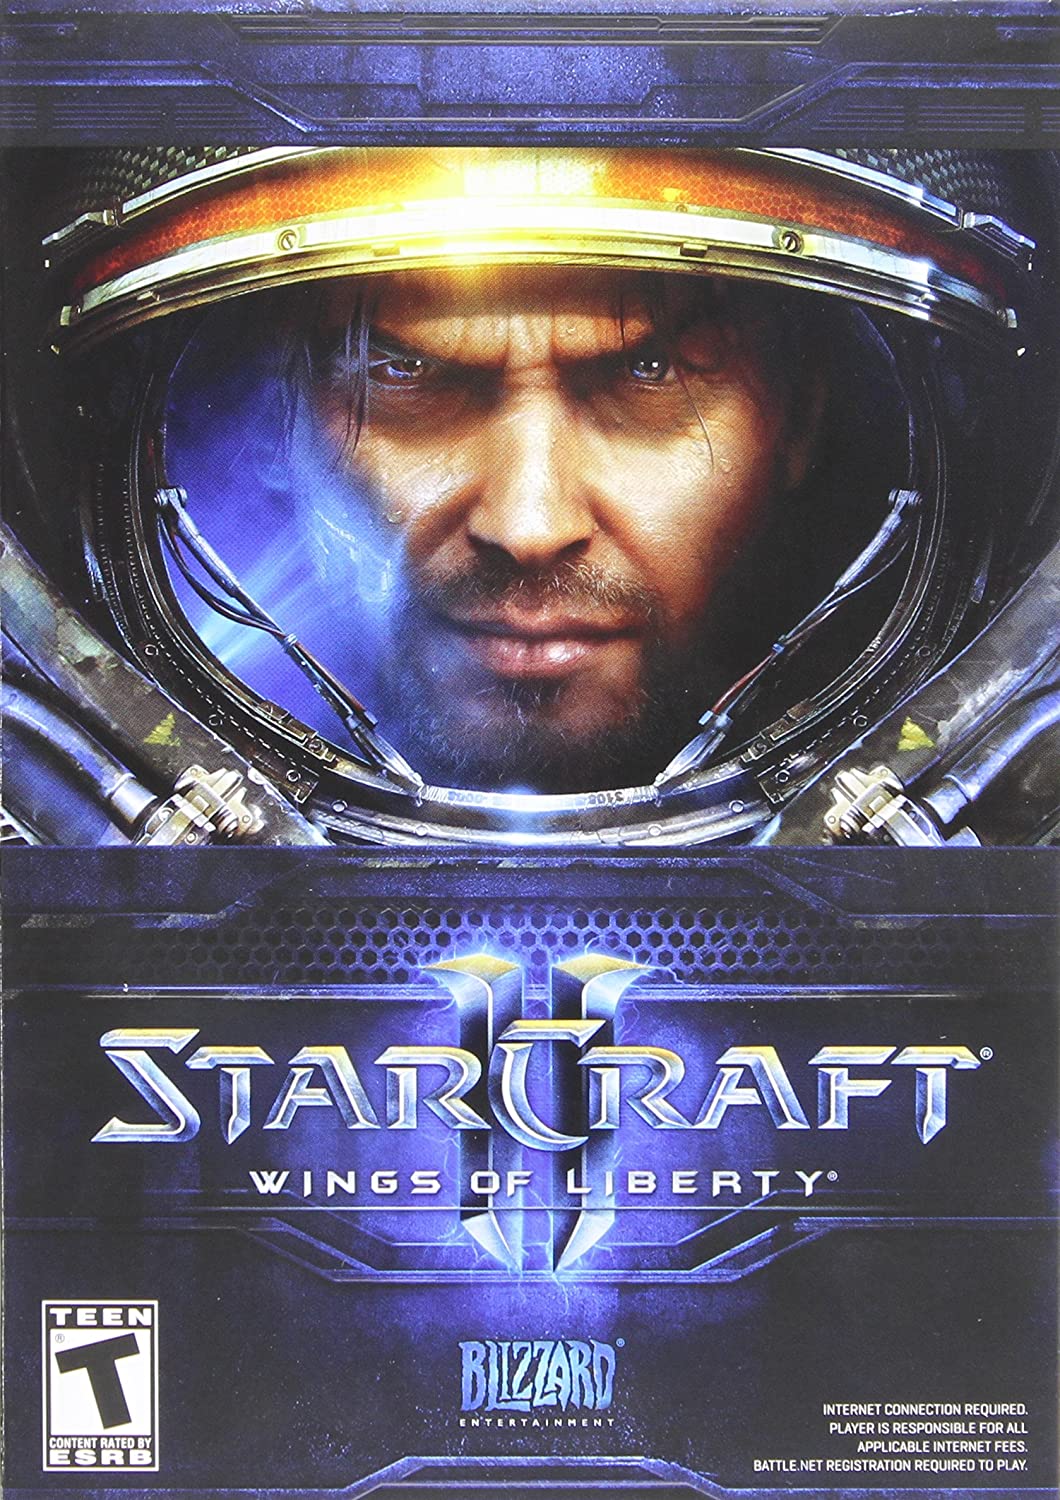 StarCraft II: Wings of Liberty player count stats